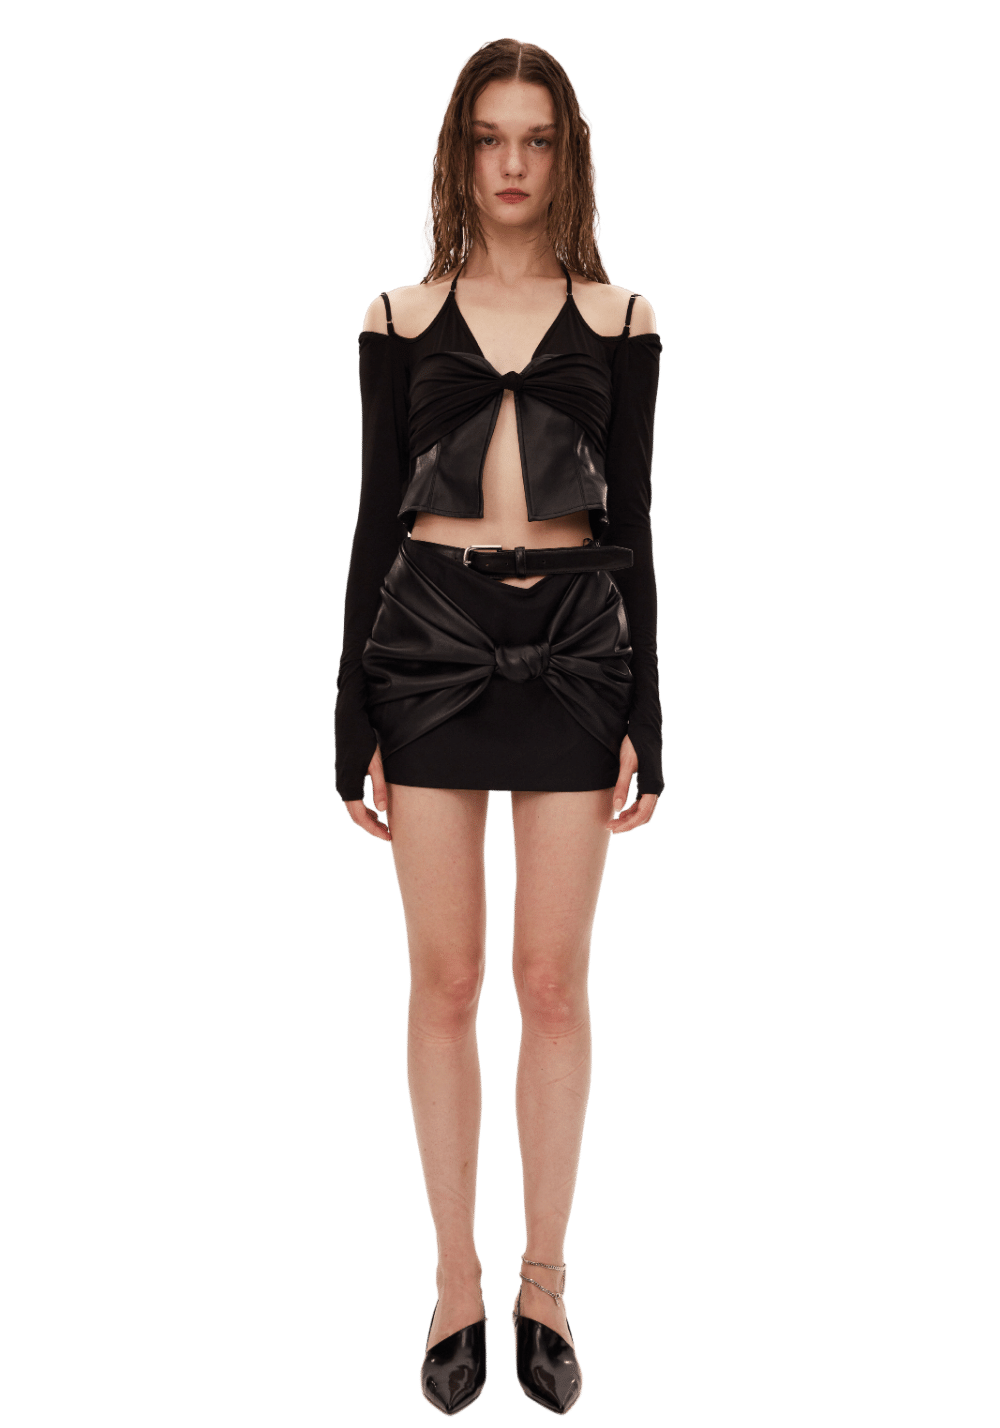 Knitted Spliced Leather Knot Top - PSYLOS 1, Knitted Spliced Leather Knot Top, Shirt, LEEWEI, PSYLOS 1